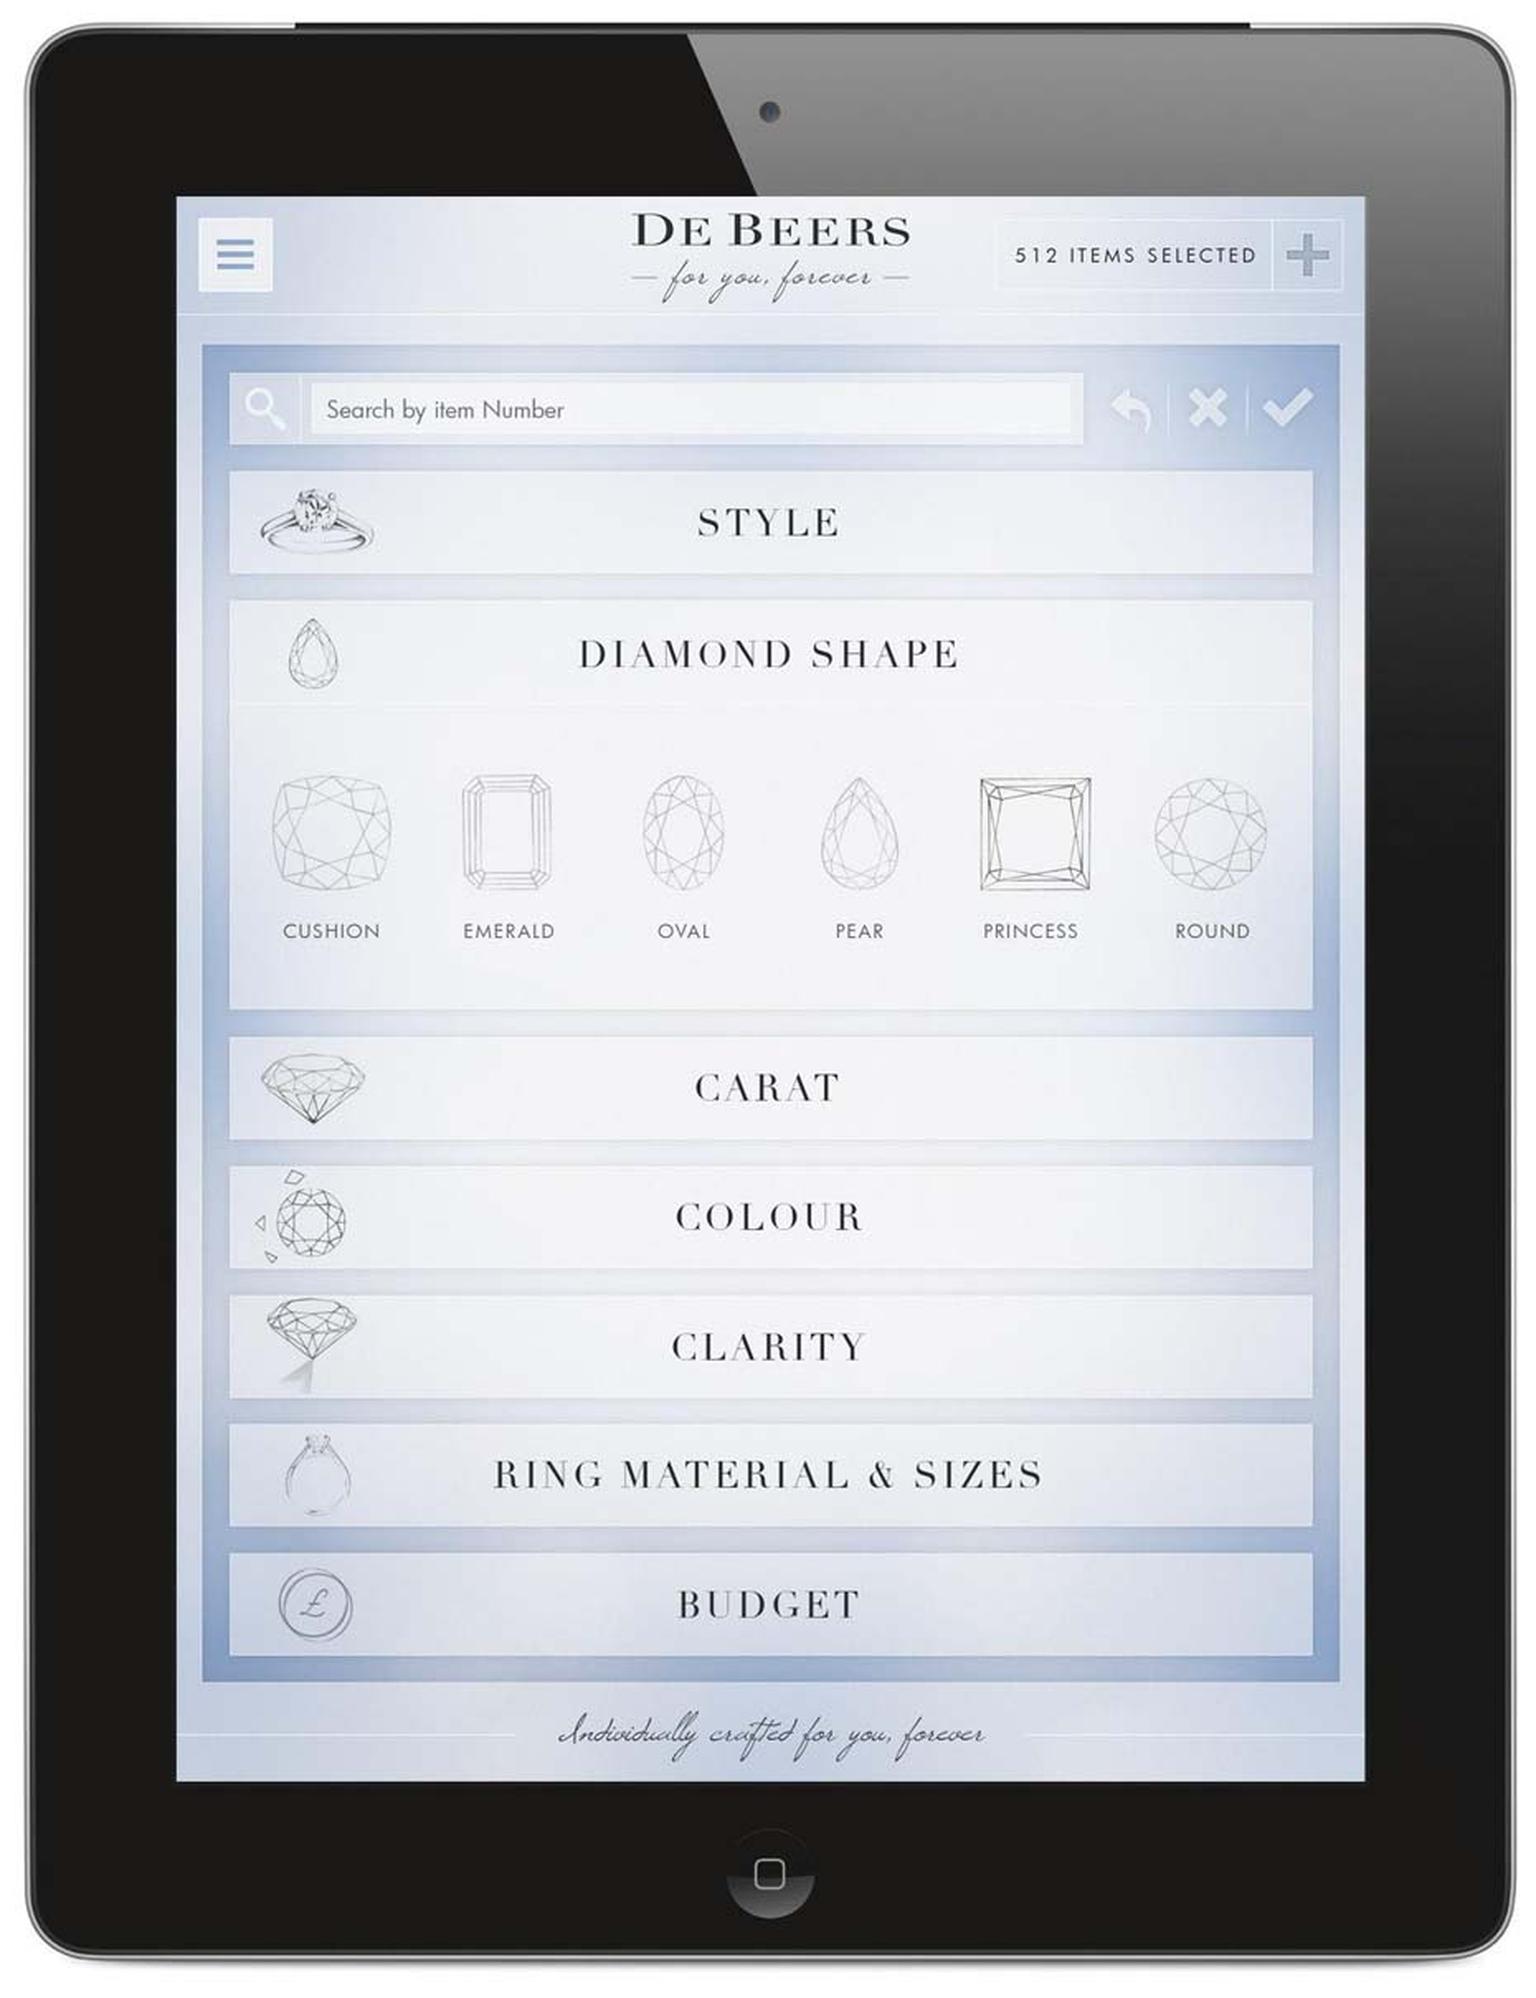 De Beers bridal app uses four simple steps to guide brides-to-be through the process of choosing a De Beers engagement ring.